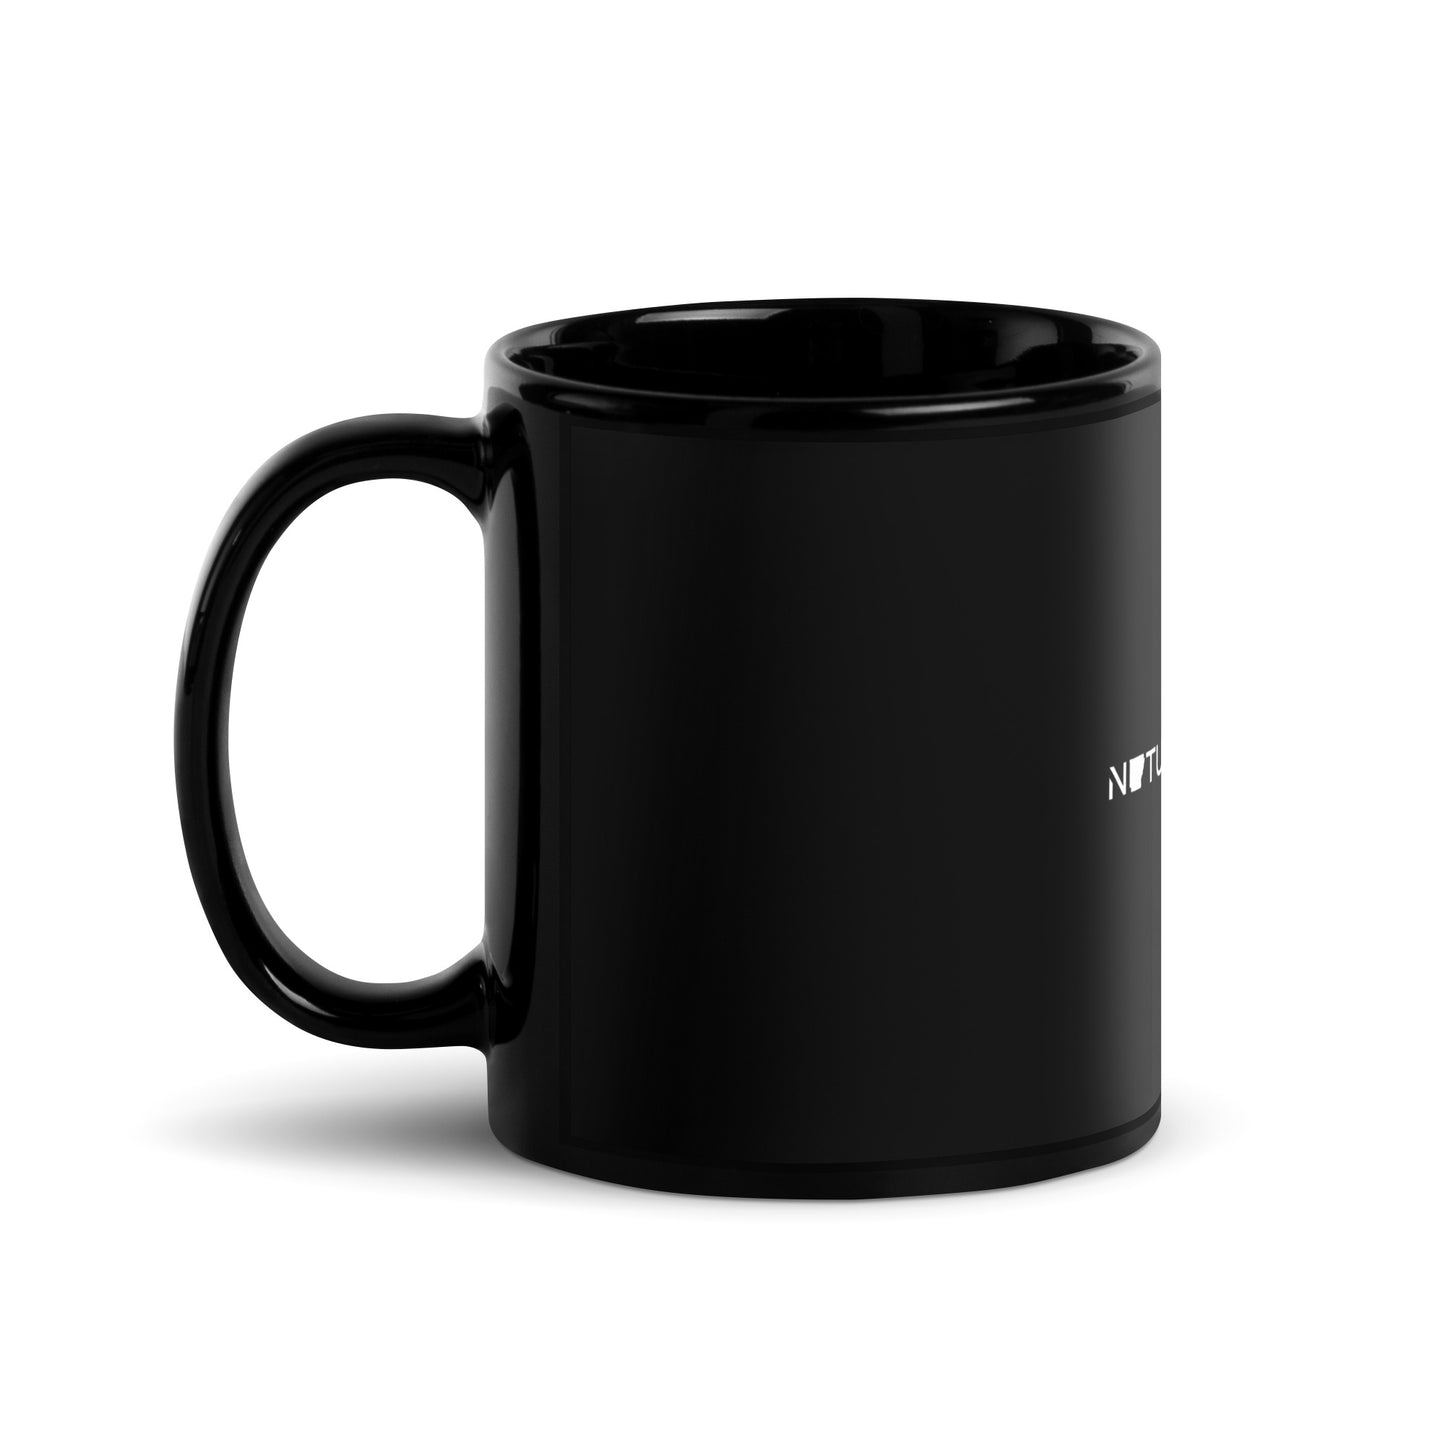 Natural Energy For The Natural State Coffee Mug